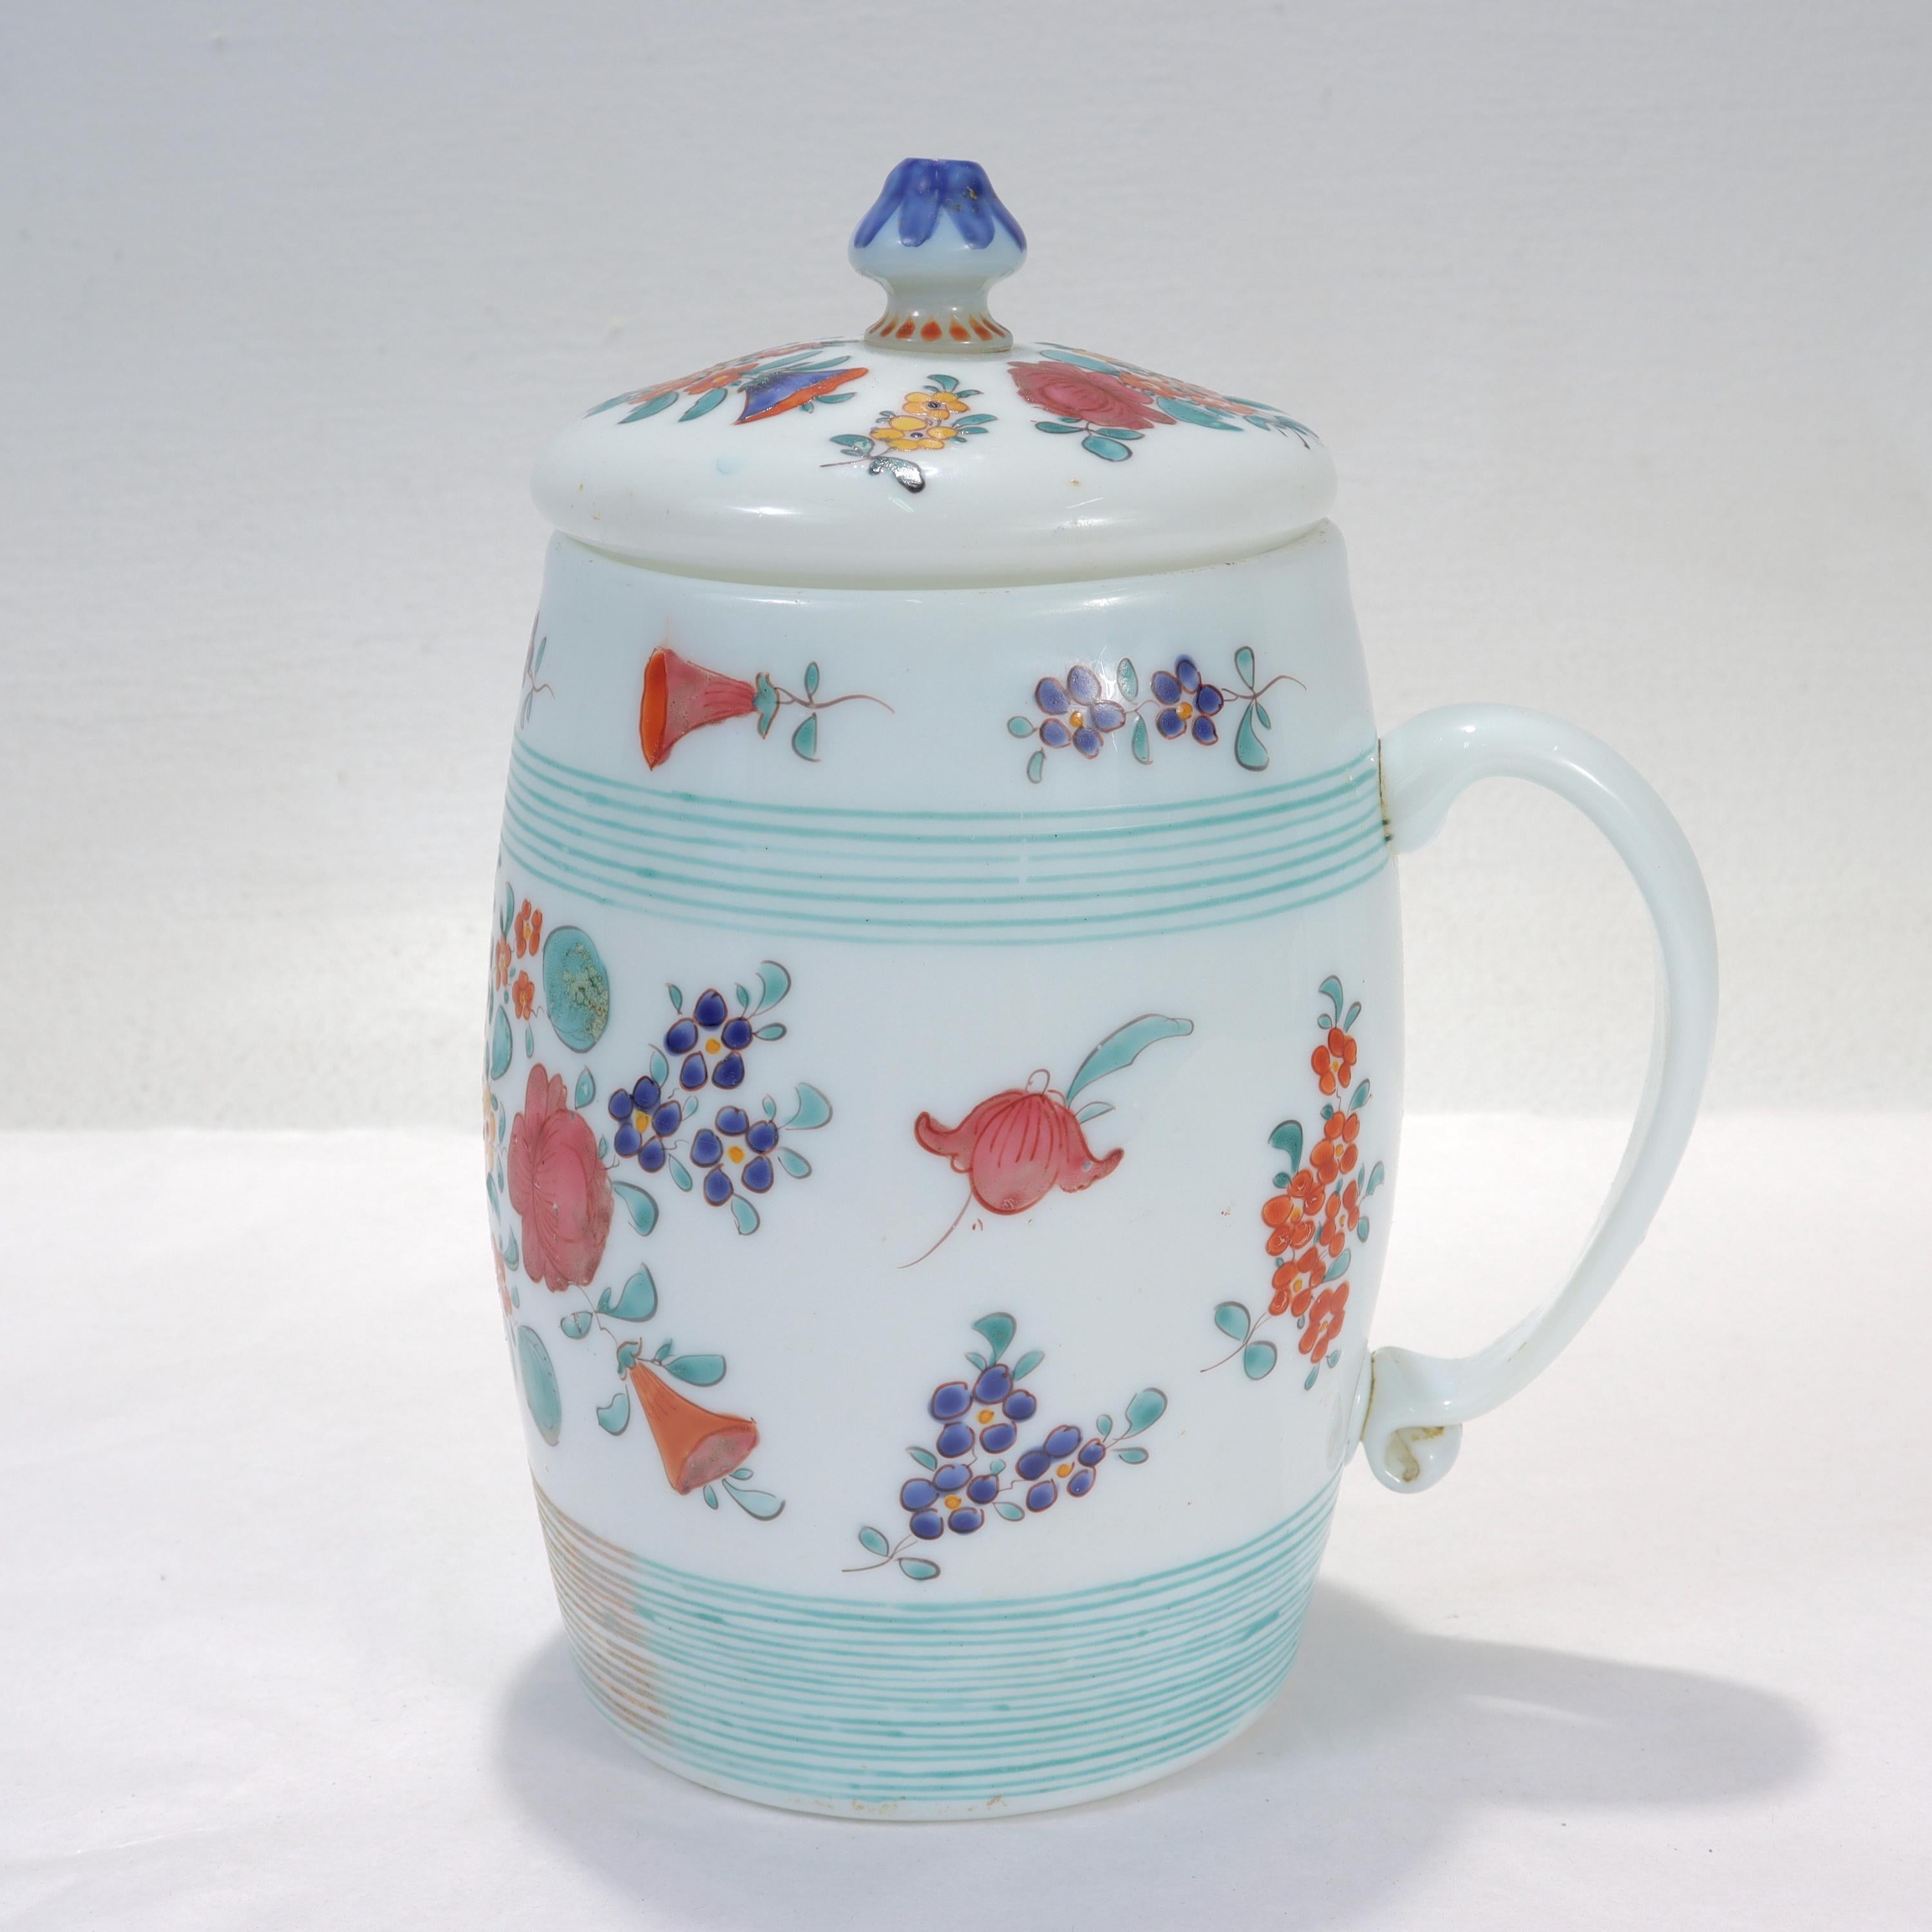 A fine antique glass beer stein.

Consisting of a handled stein with a lid decorated throughout with hand painted enamel floral motifs and green lines.

The lid has a finial decorated with blue & red accents. 

Simply a wonderful early Milchglas